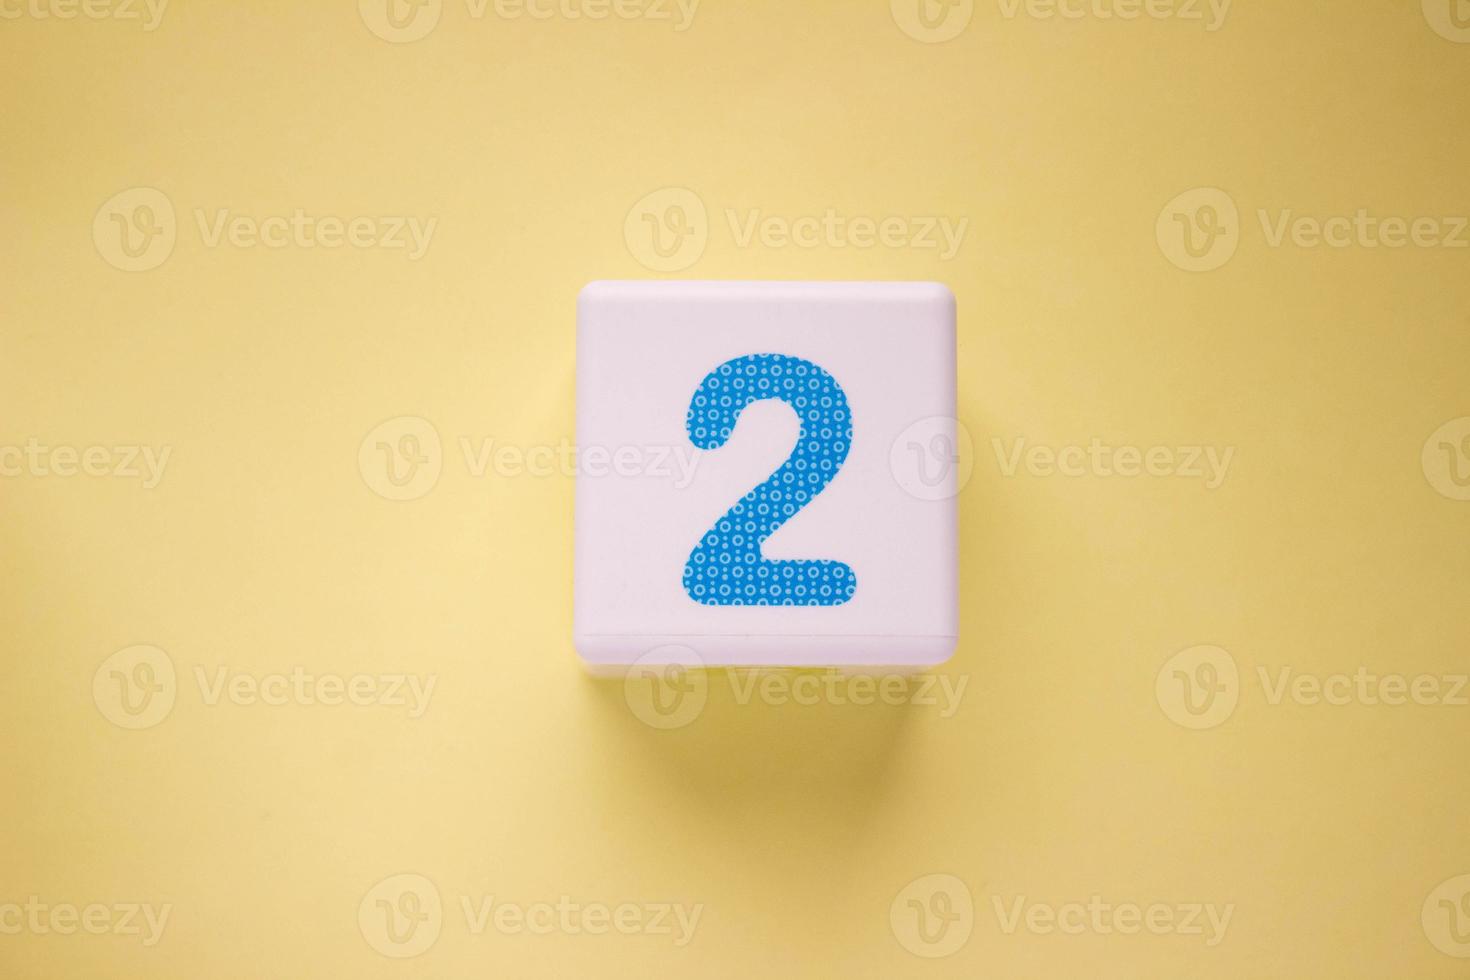 Close-up photo of a white plastic cube with a blue number 2 on a yellow background. Object in the center of the photo